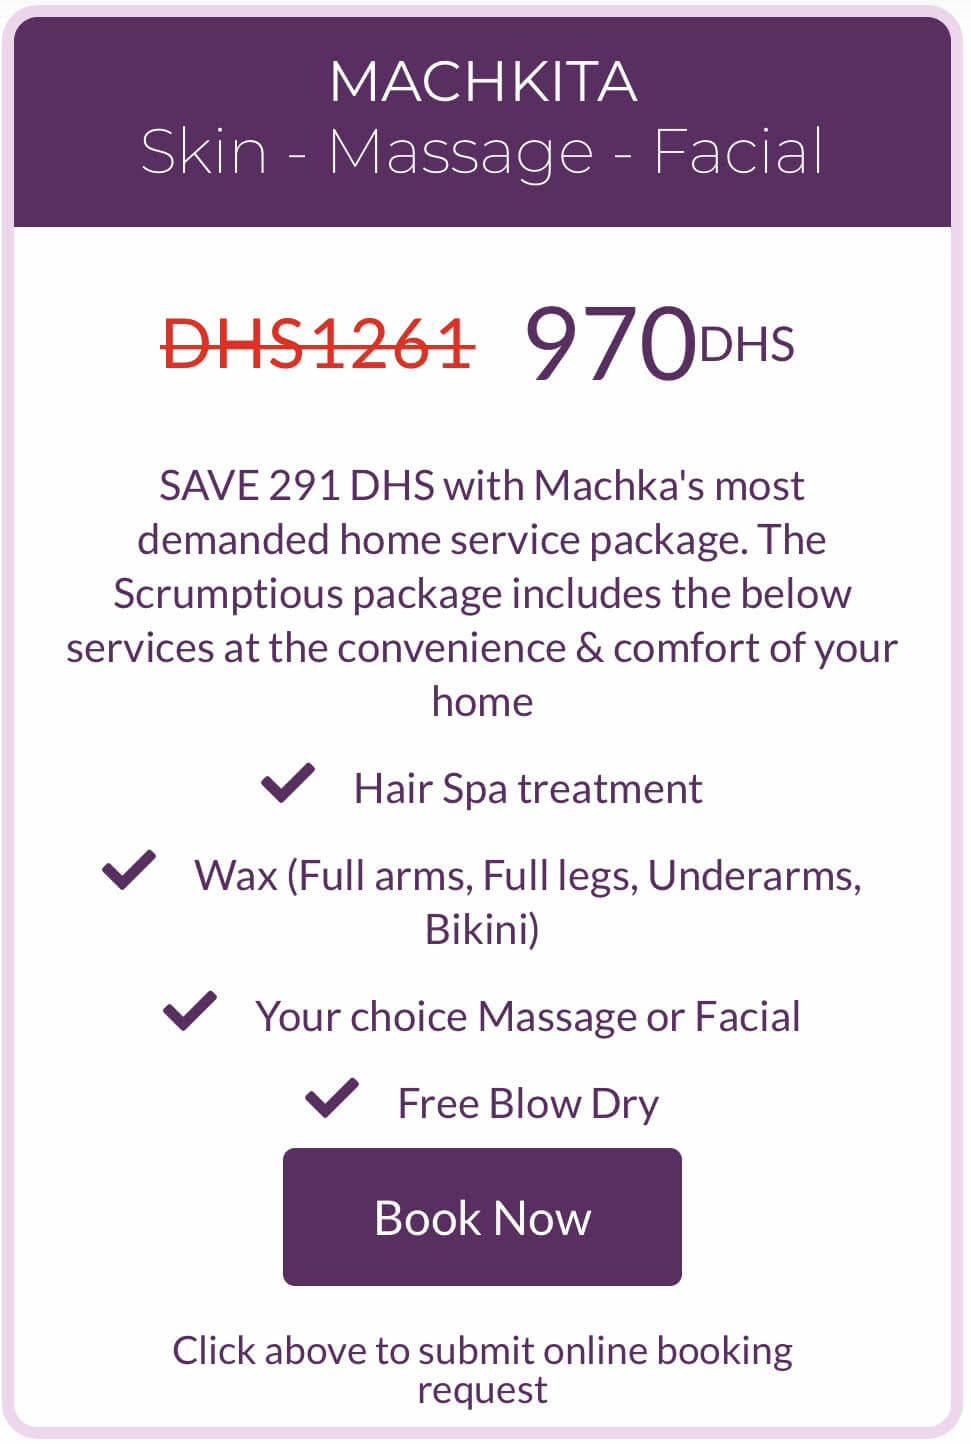 Dubai Machka Beauty & fitness services at home - Hair Salon services - Home services hair colour keratin extensions Brazilian blowout nails massage slimming personal training fitness and more - Package offer 2